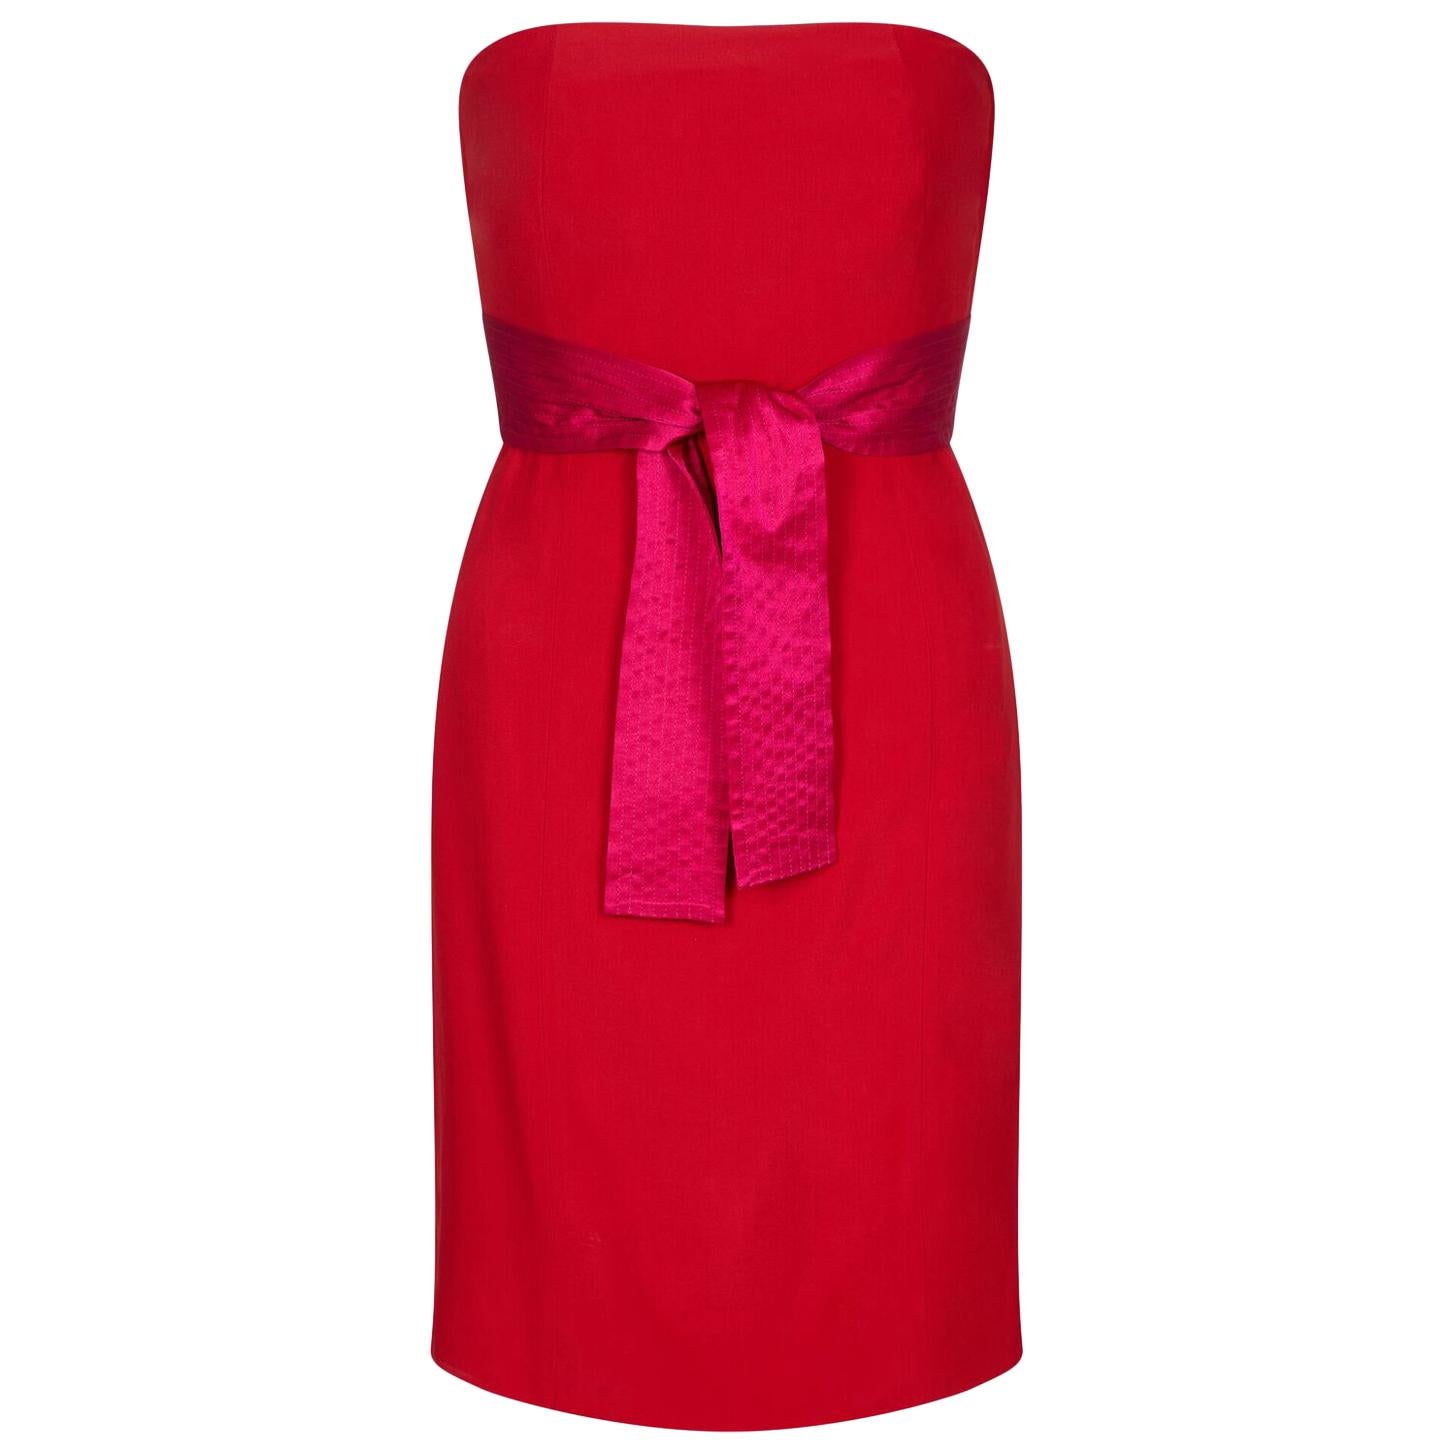 Gianfranco Ferre 1980s Crimson Cocktail Dress With Pink Fan Detail For Sale